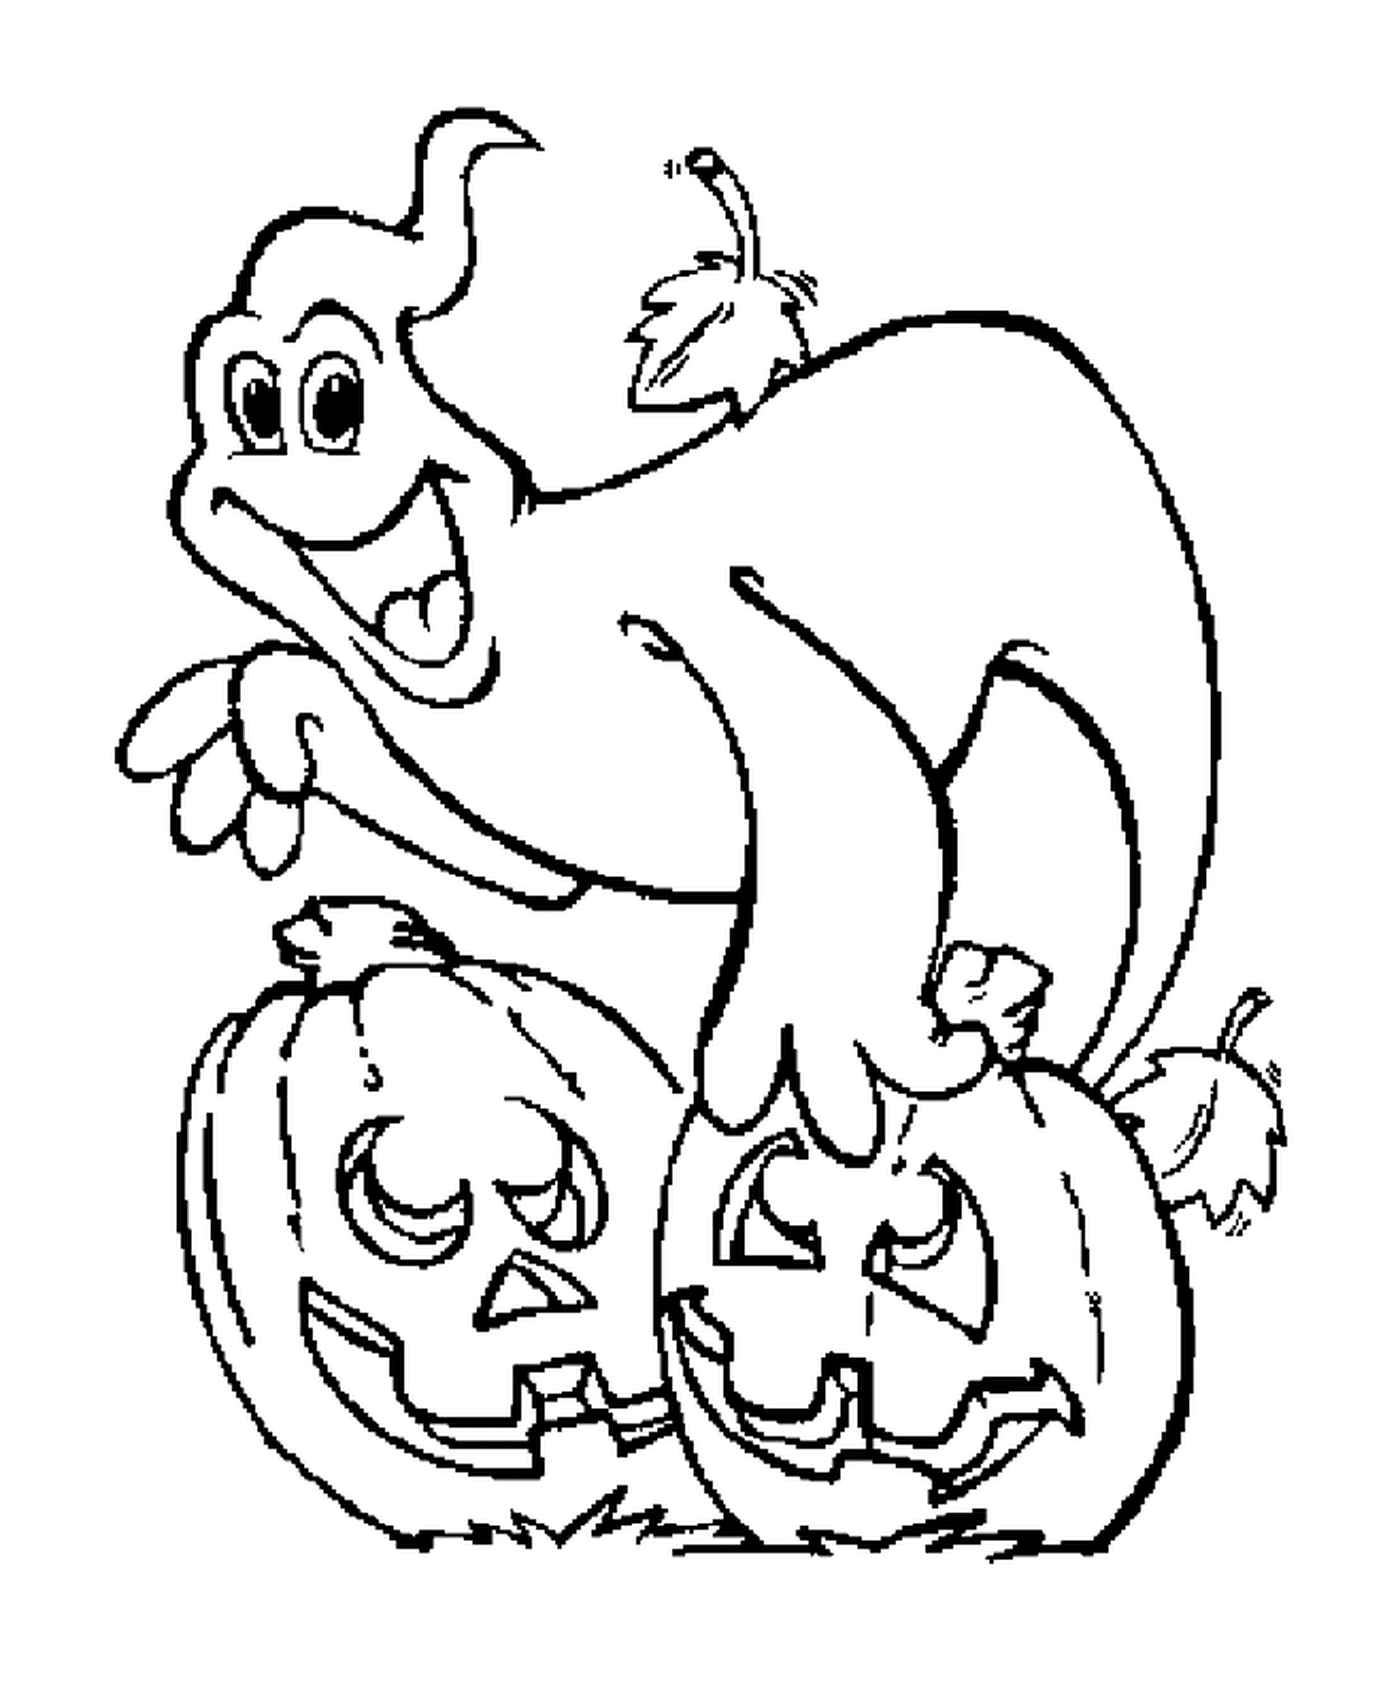  A ghost and two Halloween pumpkins 